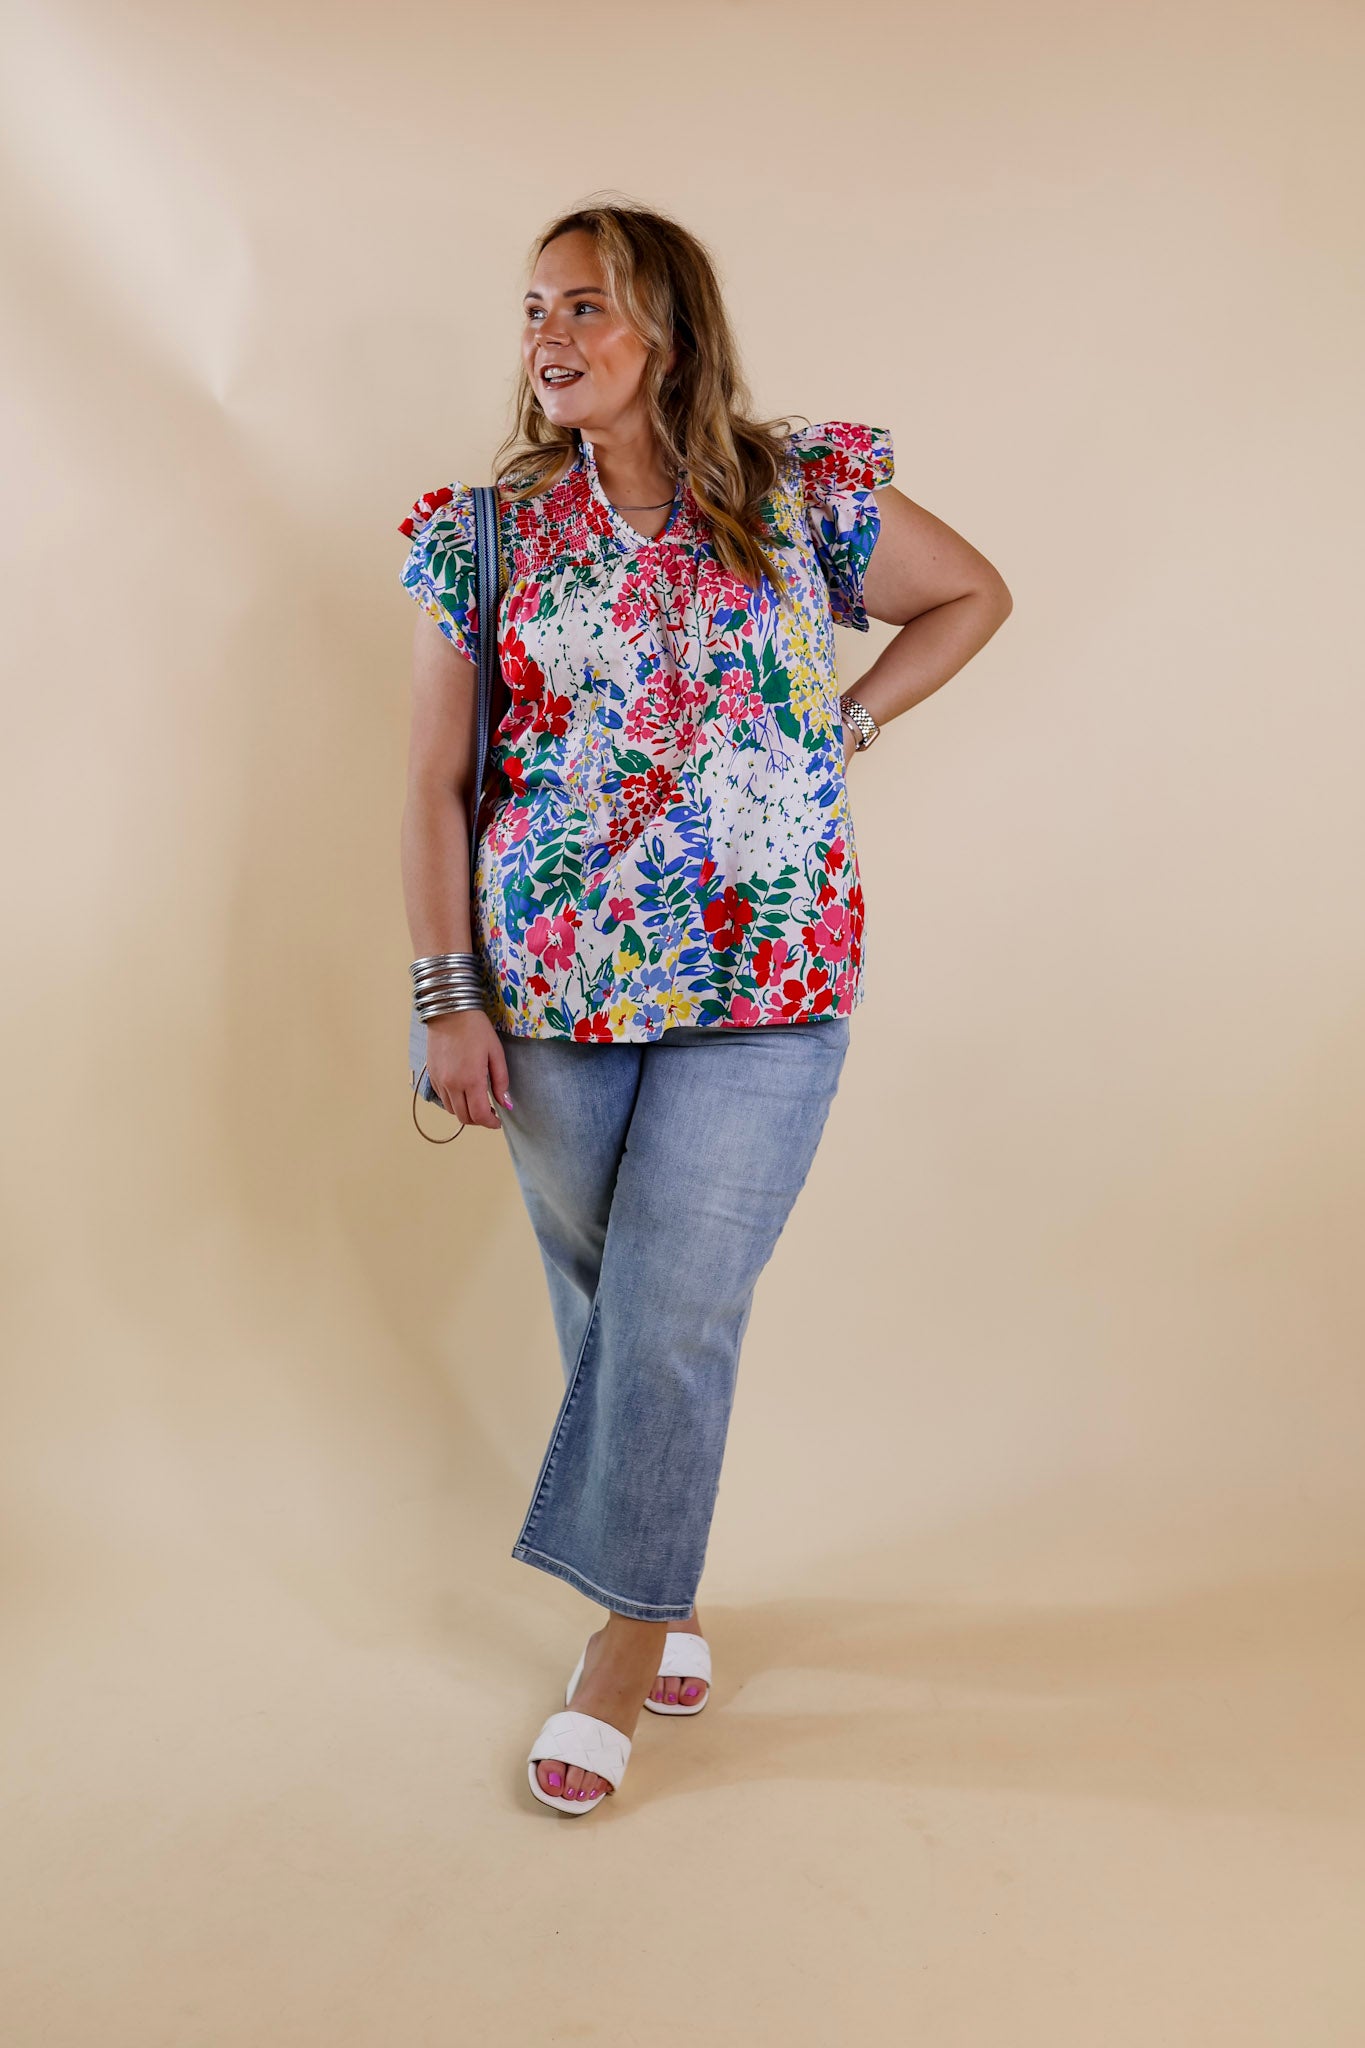 Lovely Line Up Floral Print with Ruffle Cap Sleeves in Ivory Mix - Giddy Up Glamour Boutique